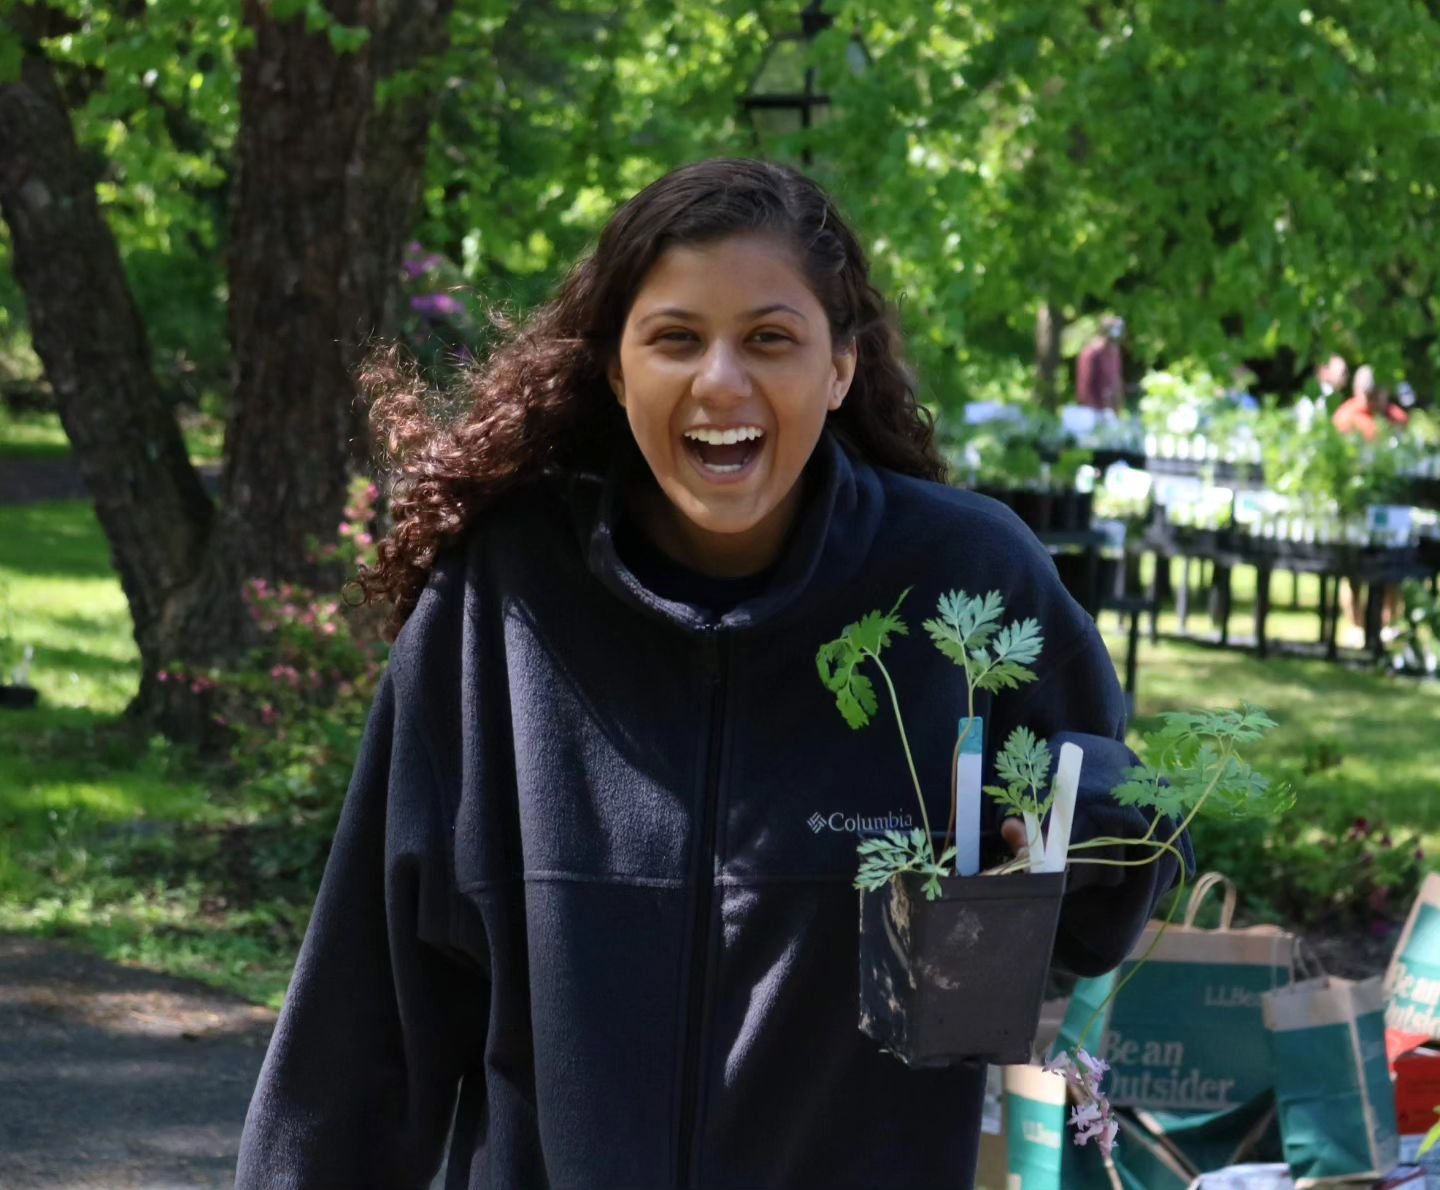 Perkiomen Native Plant Sale Pre-Ordering is finally here!! Pre-order your favorite native plant species today! Visit our website to learn more about Native Plant Pre-Ordering and to learn about our in-person Native Plant Sale that will be held on Mot